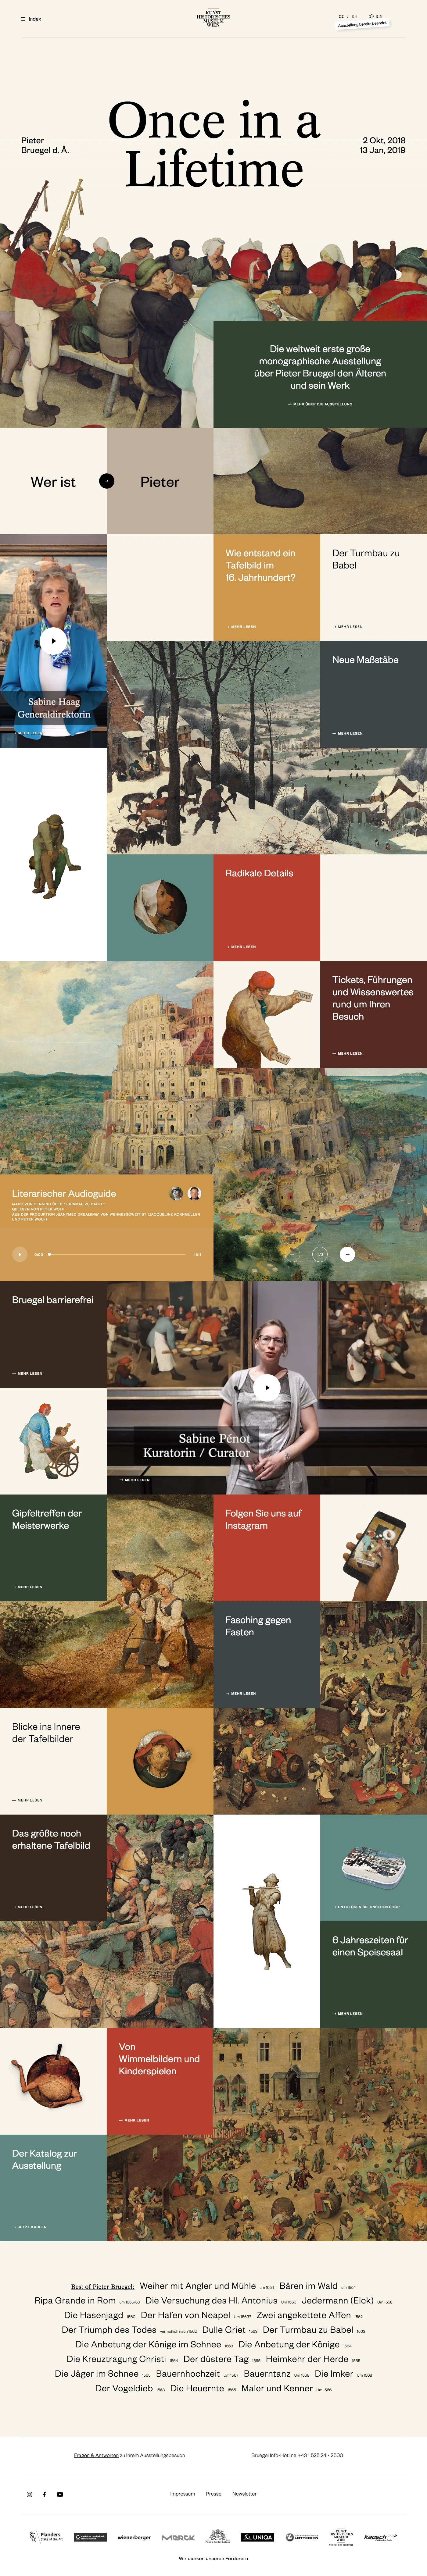 Bruegel Landing Page Example: The world's first ever major monograph exhibition featuring Pieter Bruegel the Elder and his magnificent work.